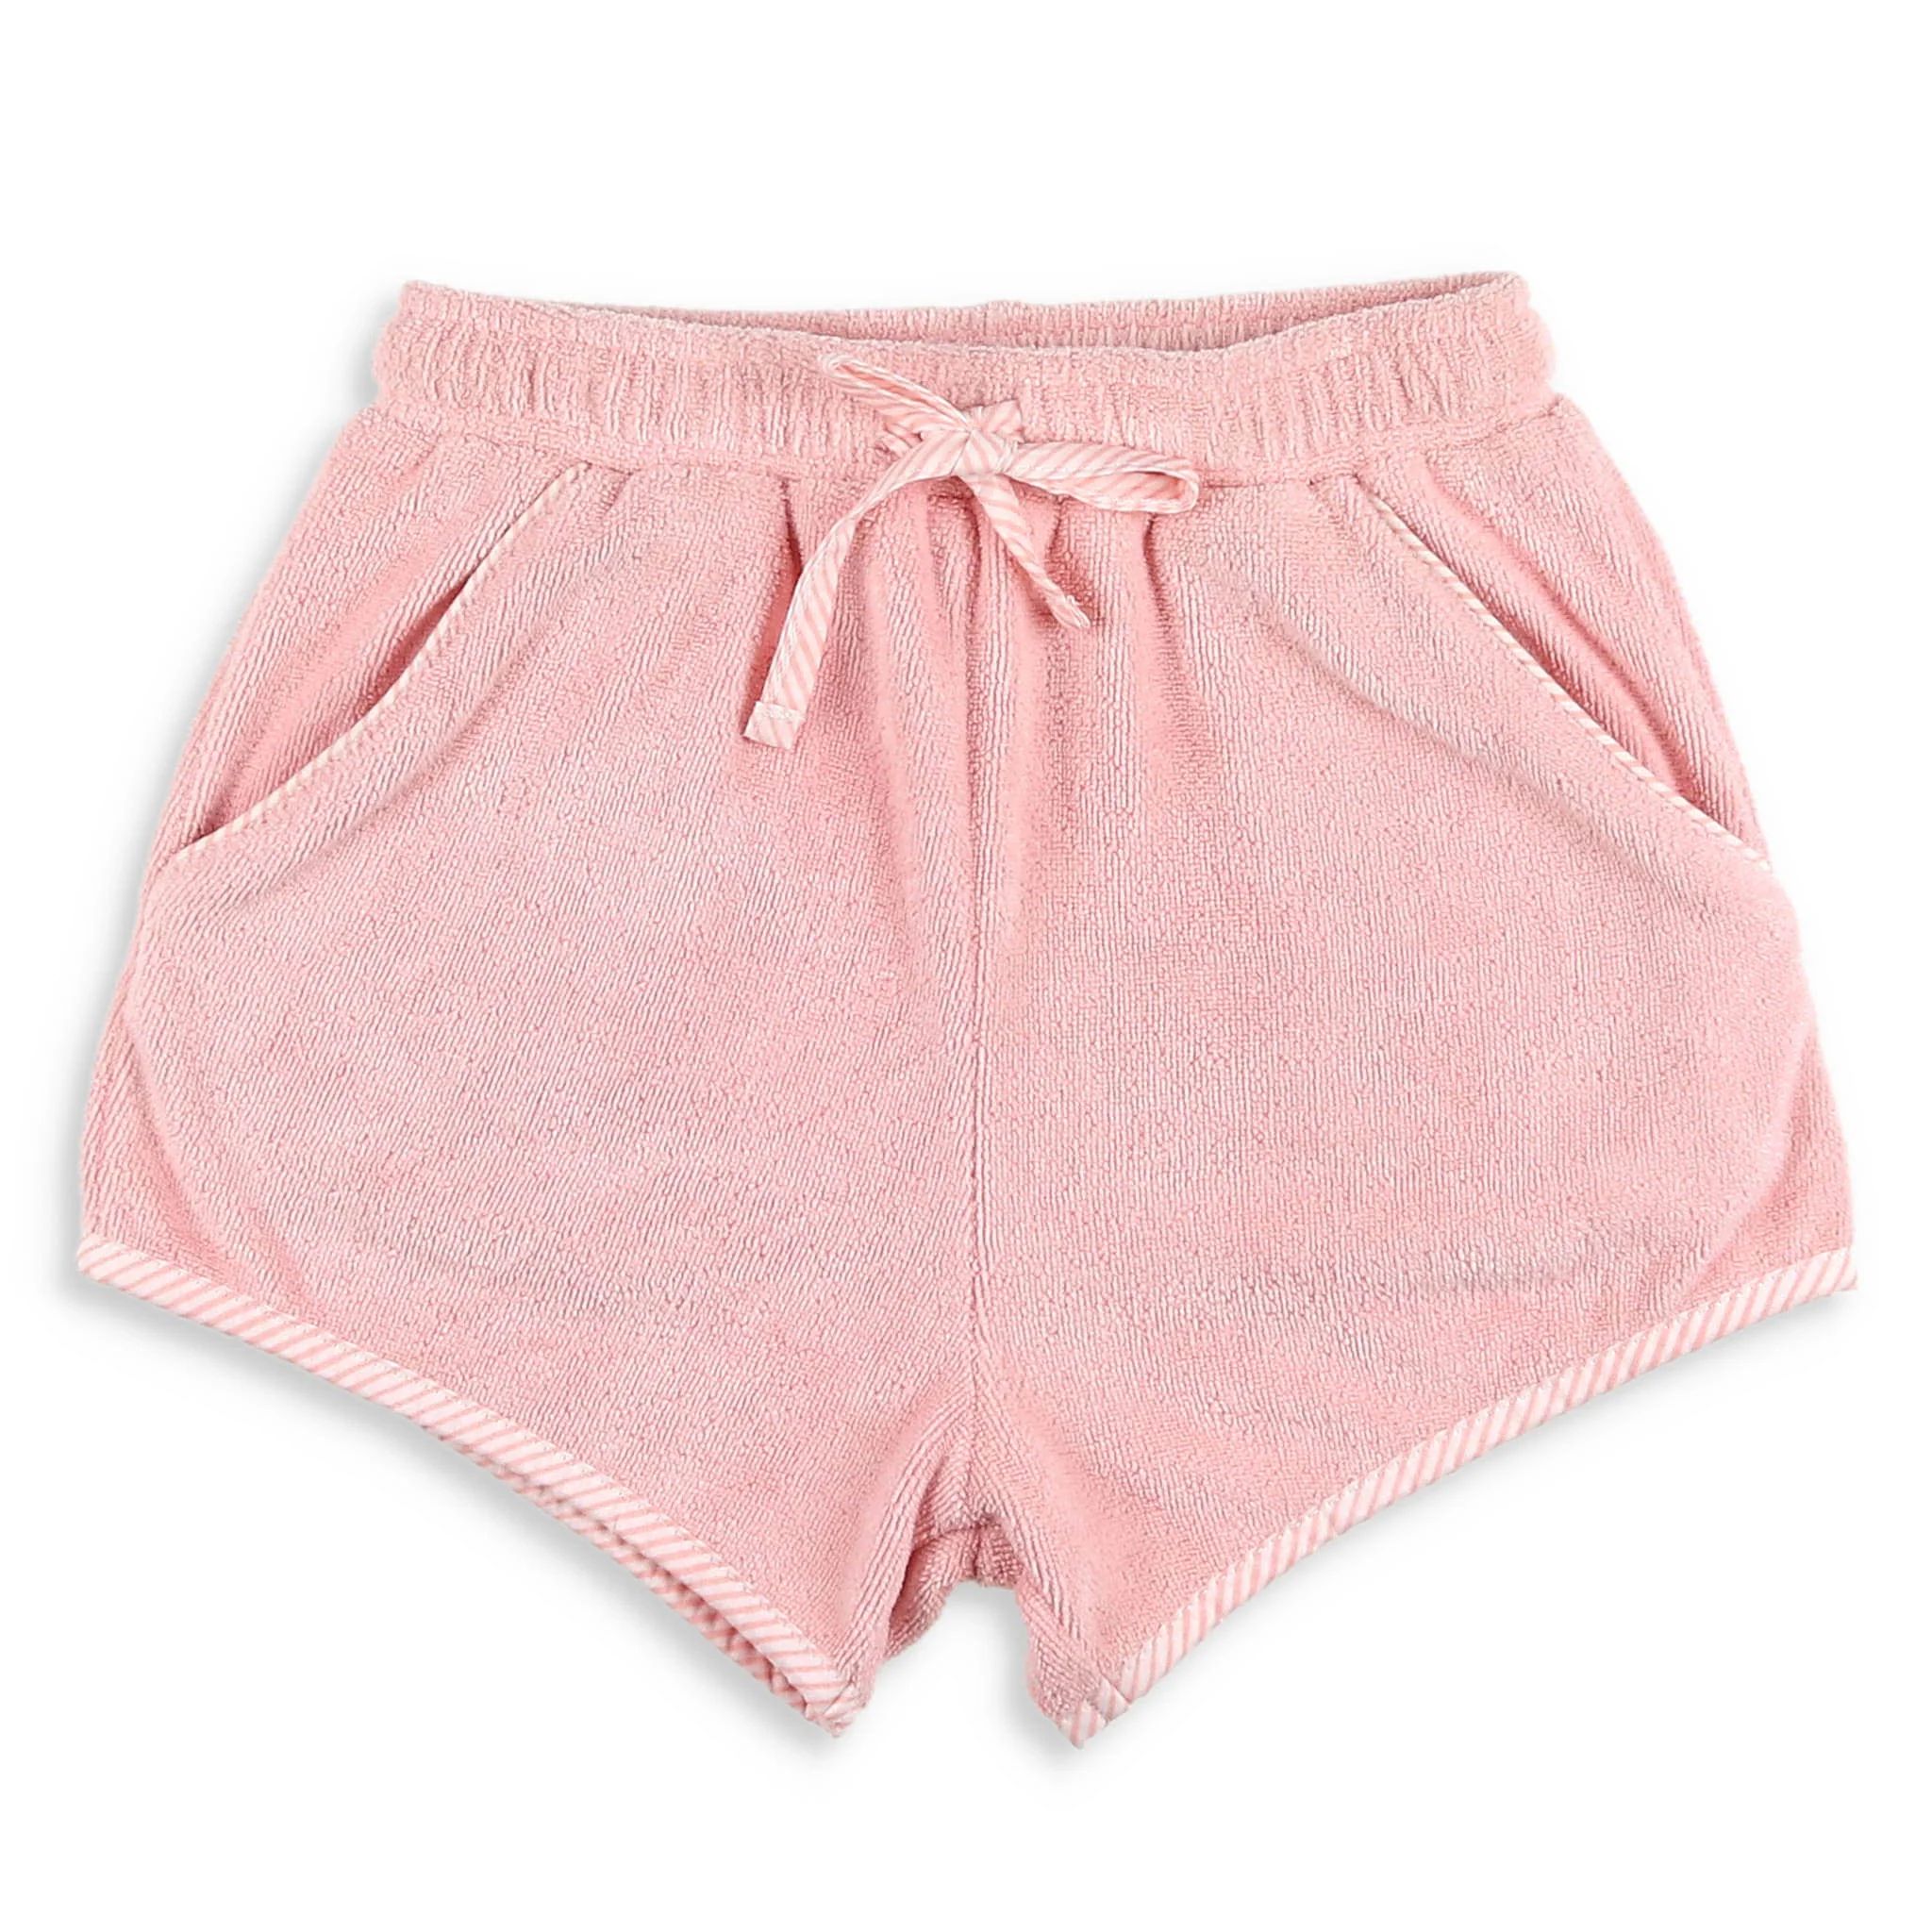 Girls Pink Terry Shorts - Shrimp and Grits Kids | Shrimp and Grits Kids